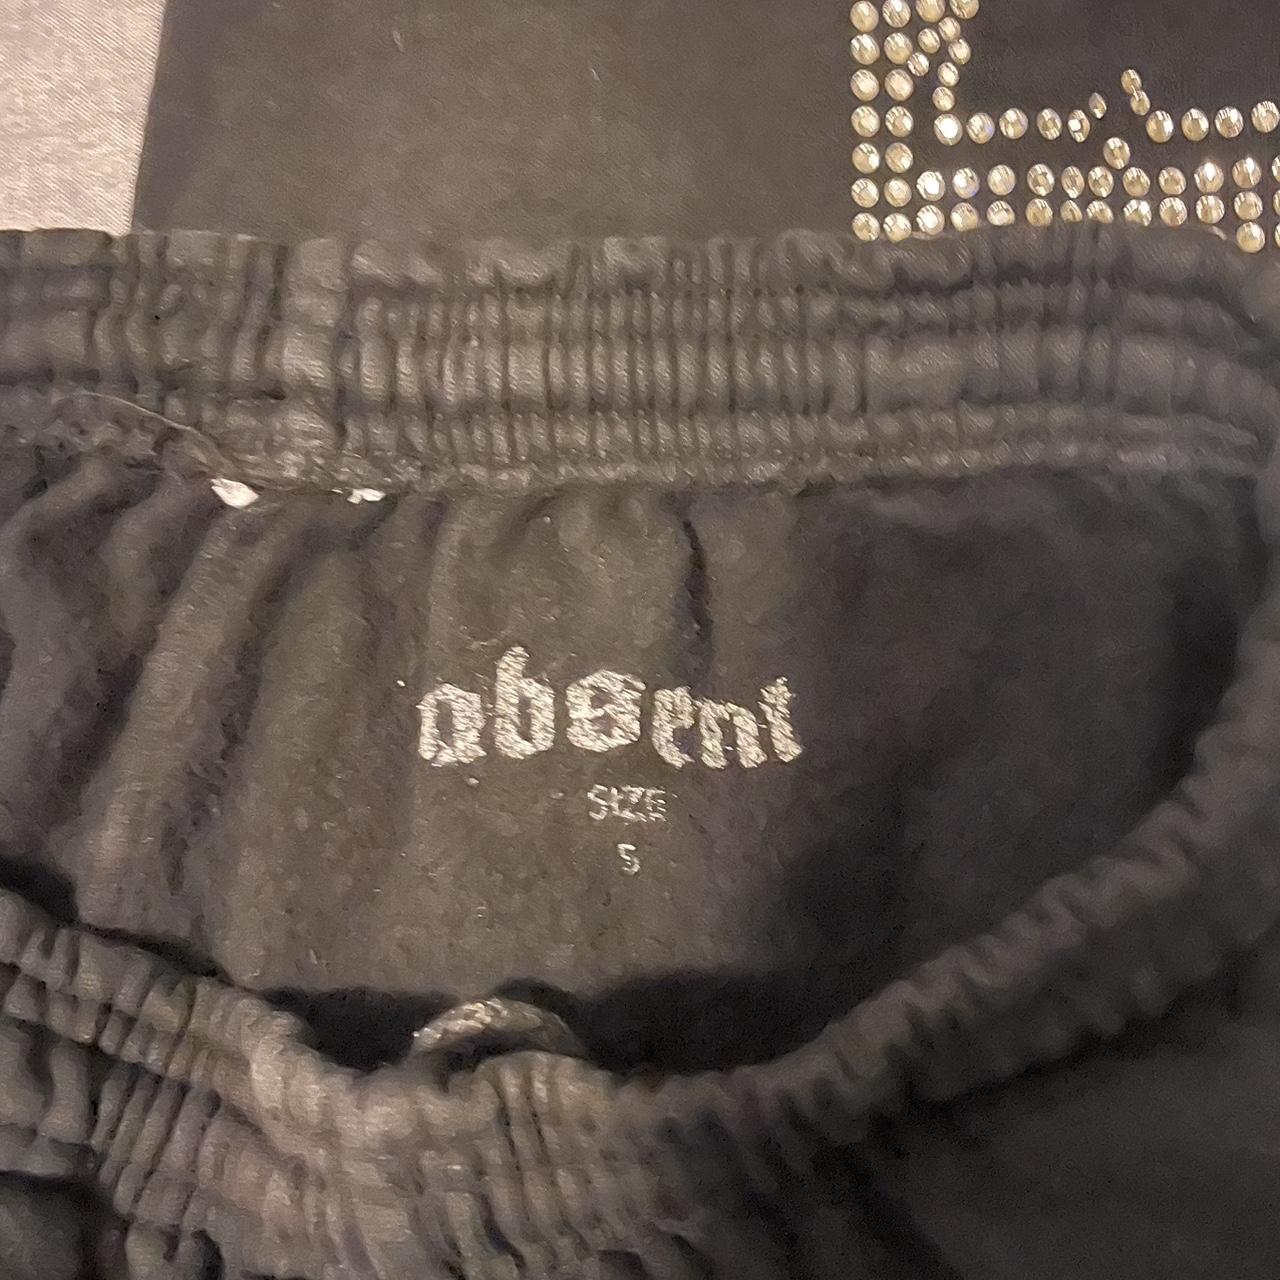 Product Image 4 - Super clean absent sweatpants!! Missing